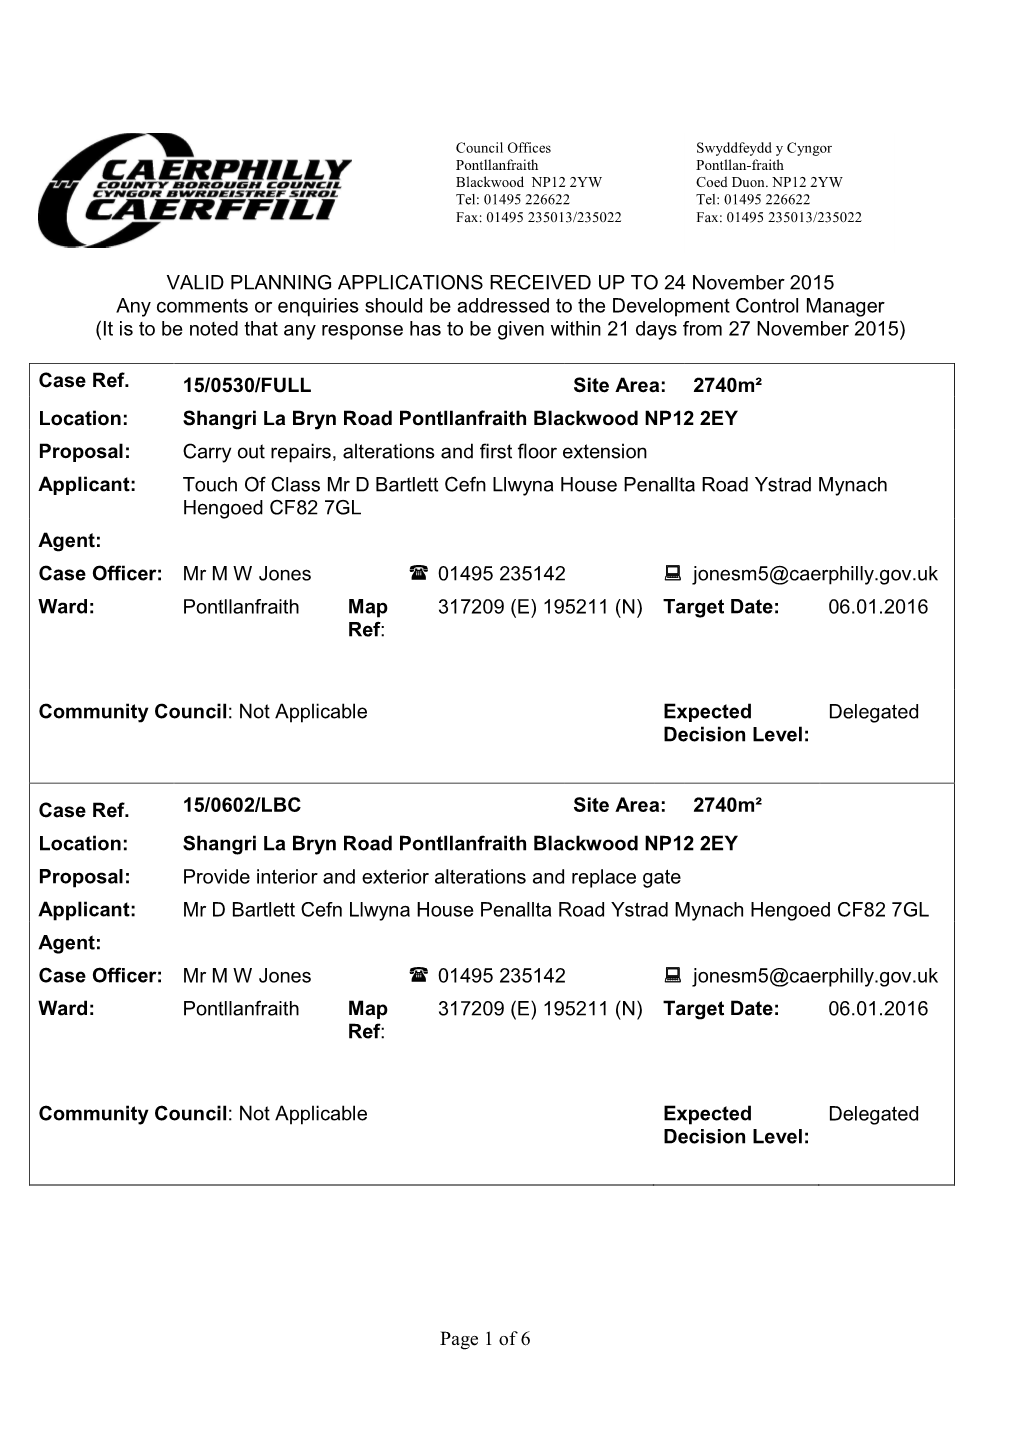 Page 1 of 6 VALID PLANNING APPLICATIONS RECEIVED up TO